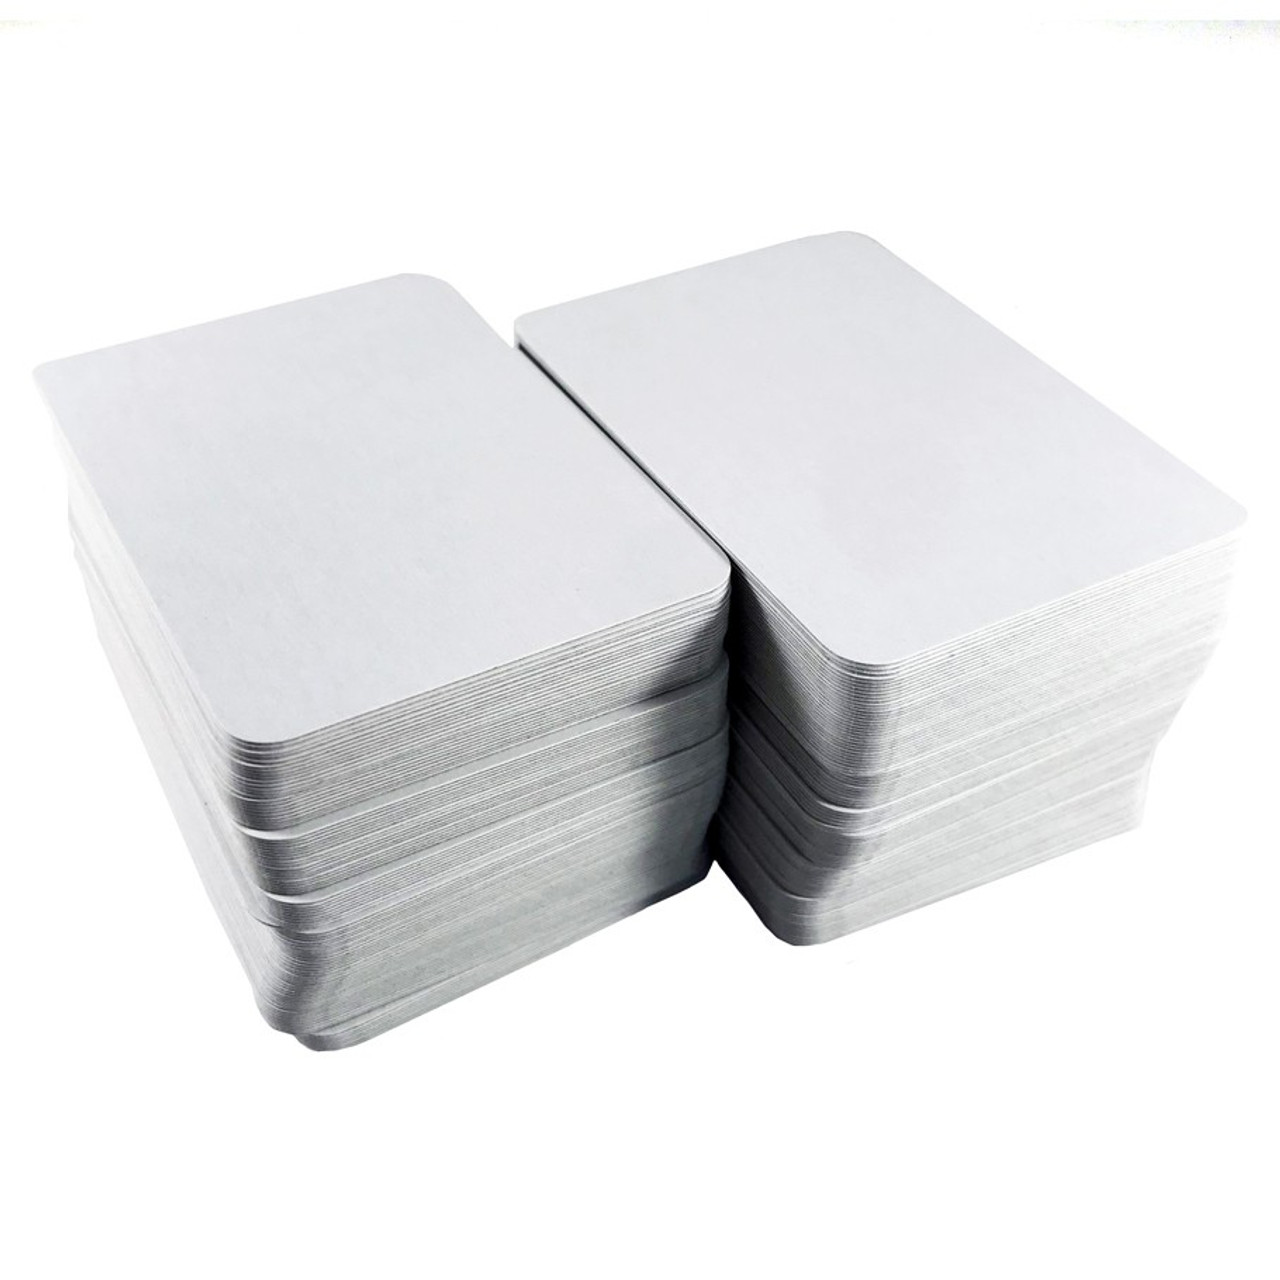 Blank Playing Cards, 50 Per Pack, 6 Packs